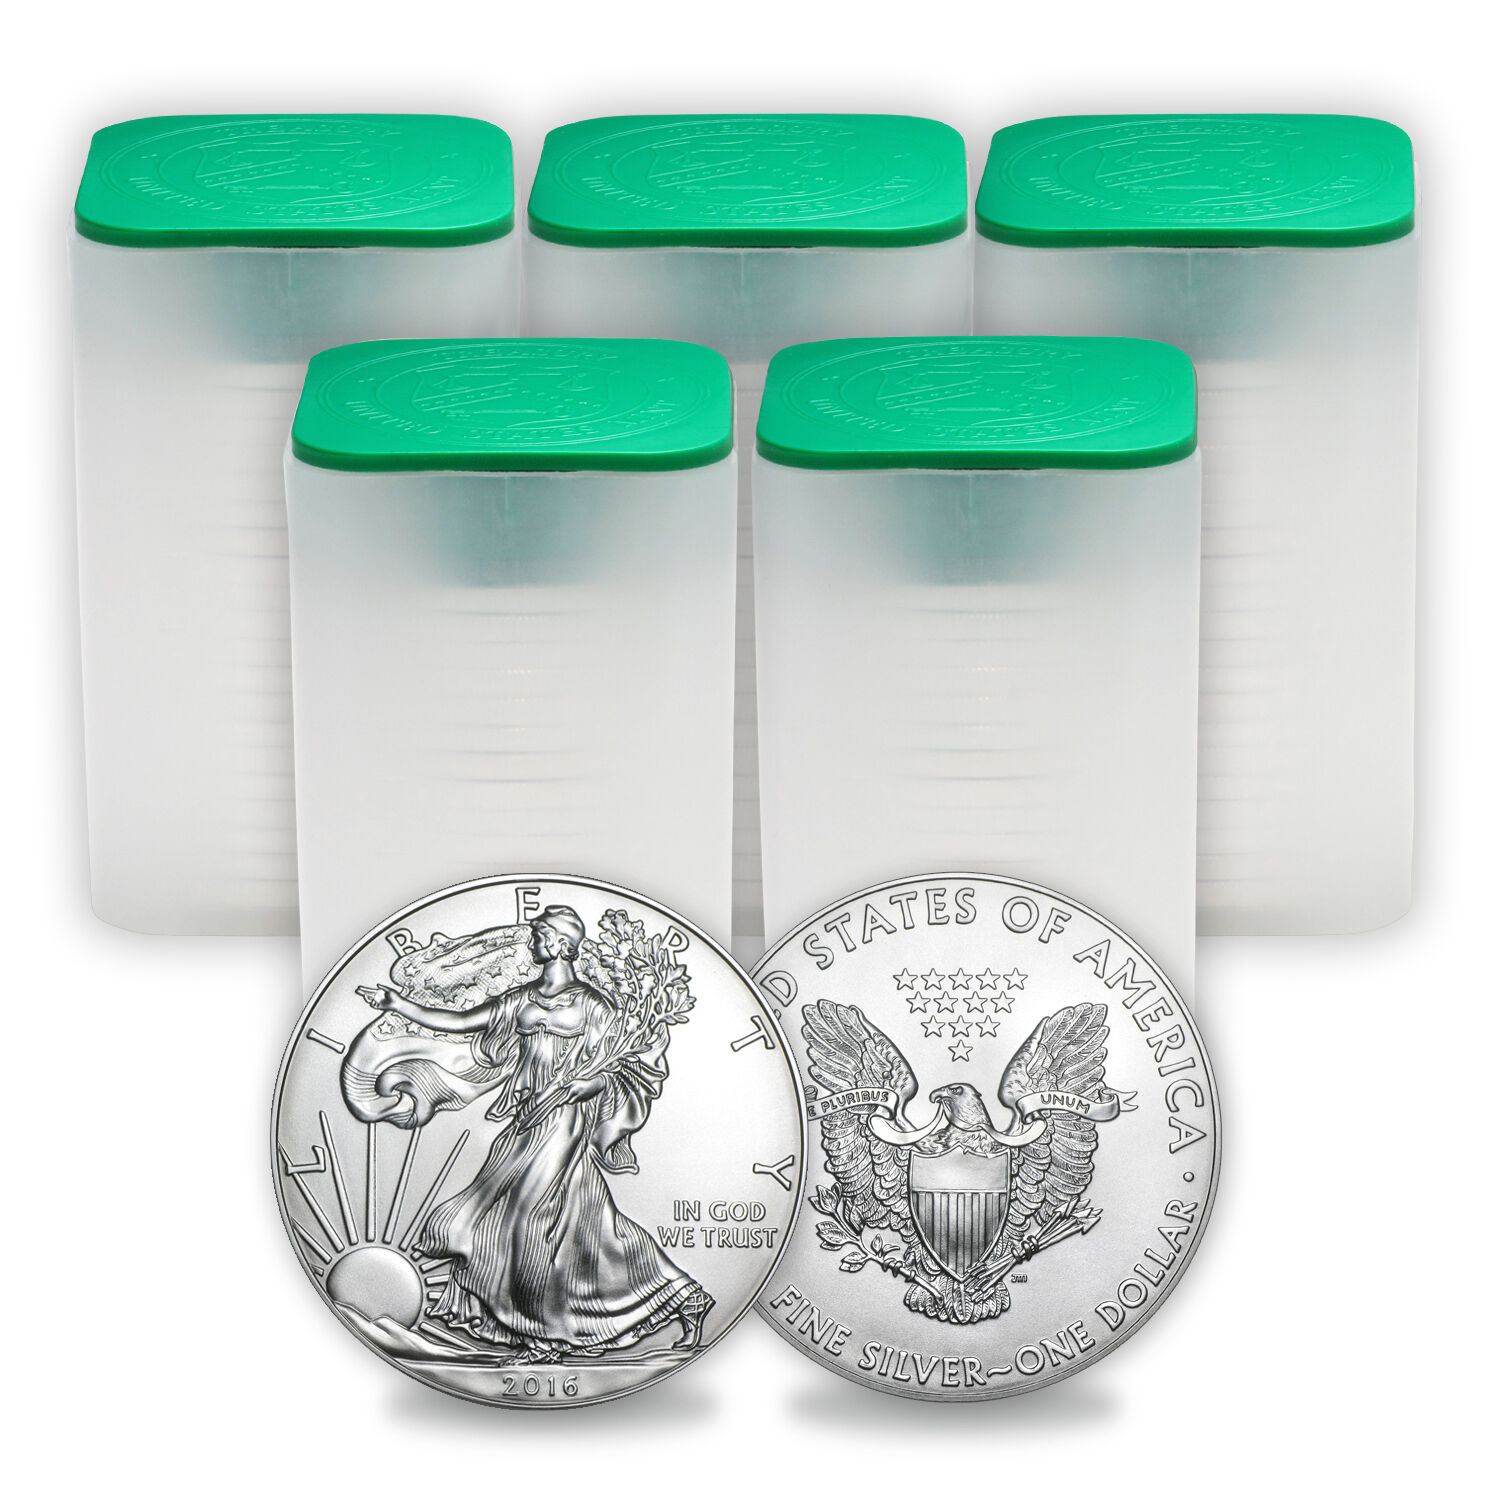 SPECIAL PRICE 2016 1 oz Silver American Eagle Coins BU (Lot of 100, Five Tubes)